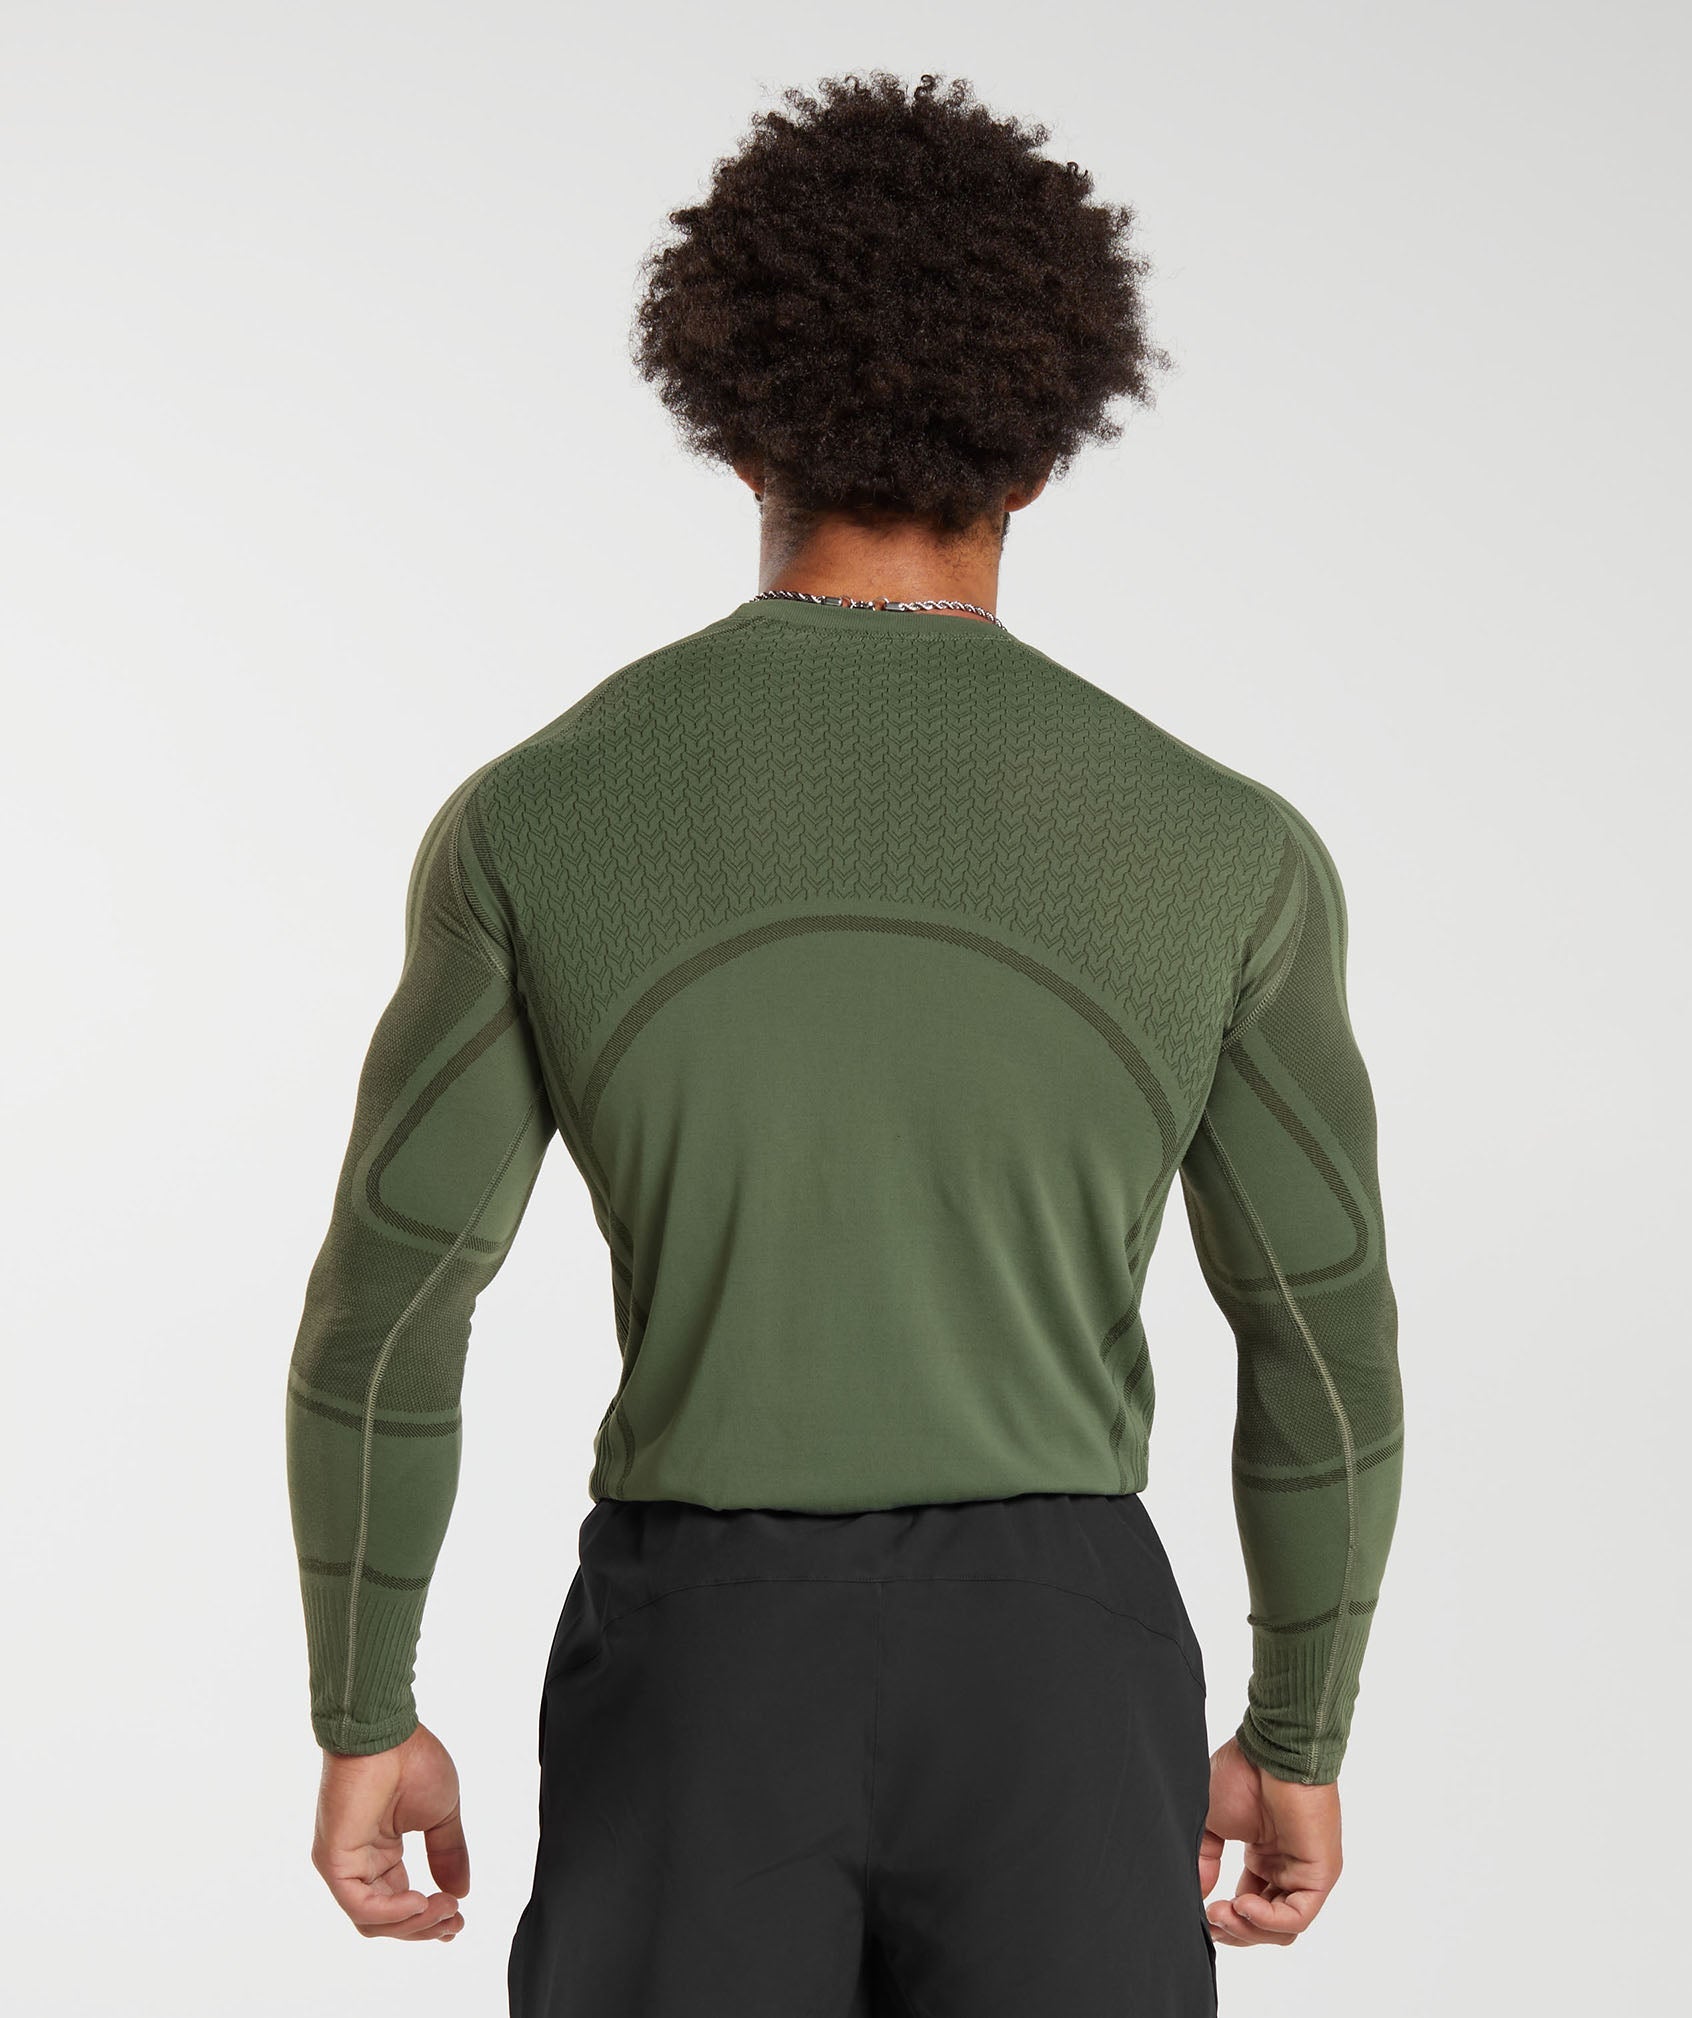 315 Seamless Long Sleeve T-Shirt in Core Olive/Deep Olive Green - view 2